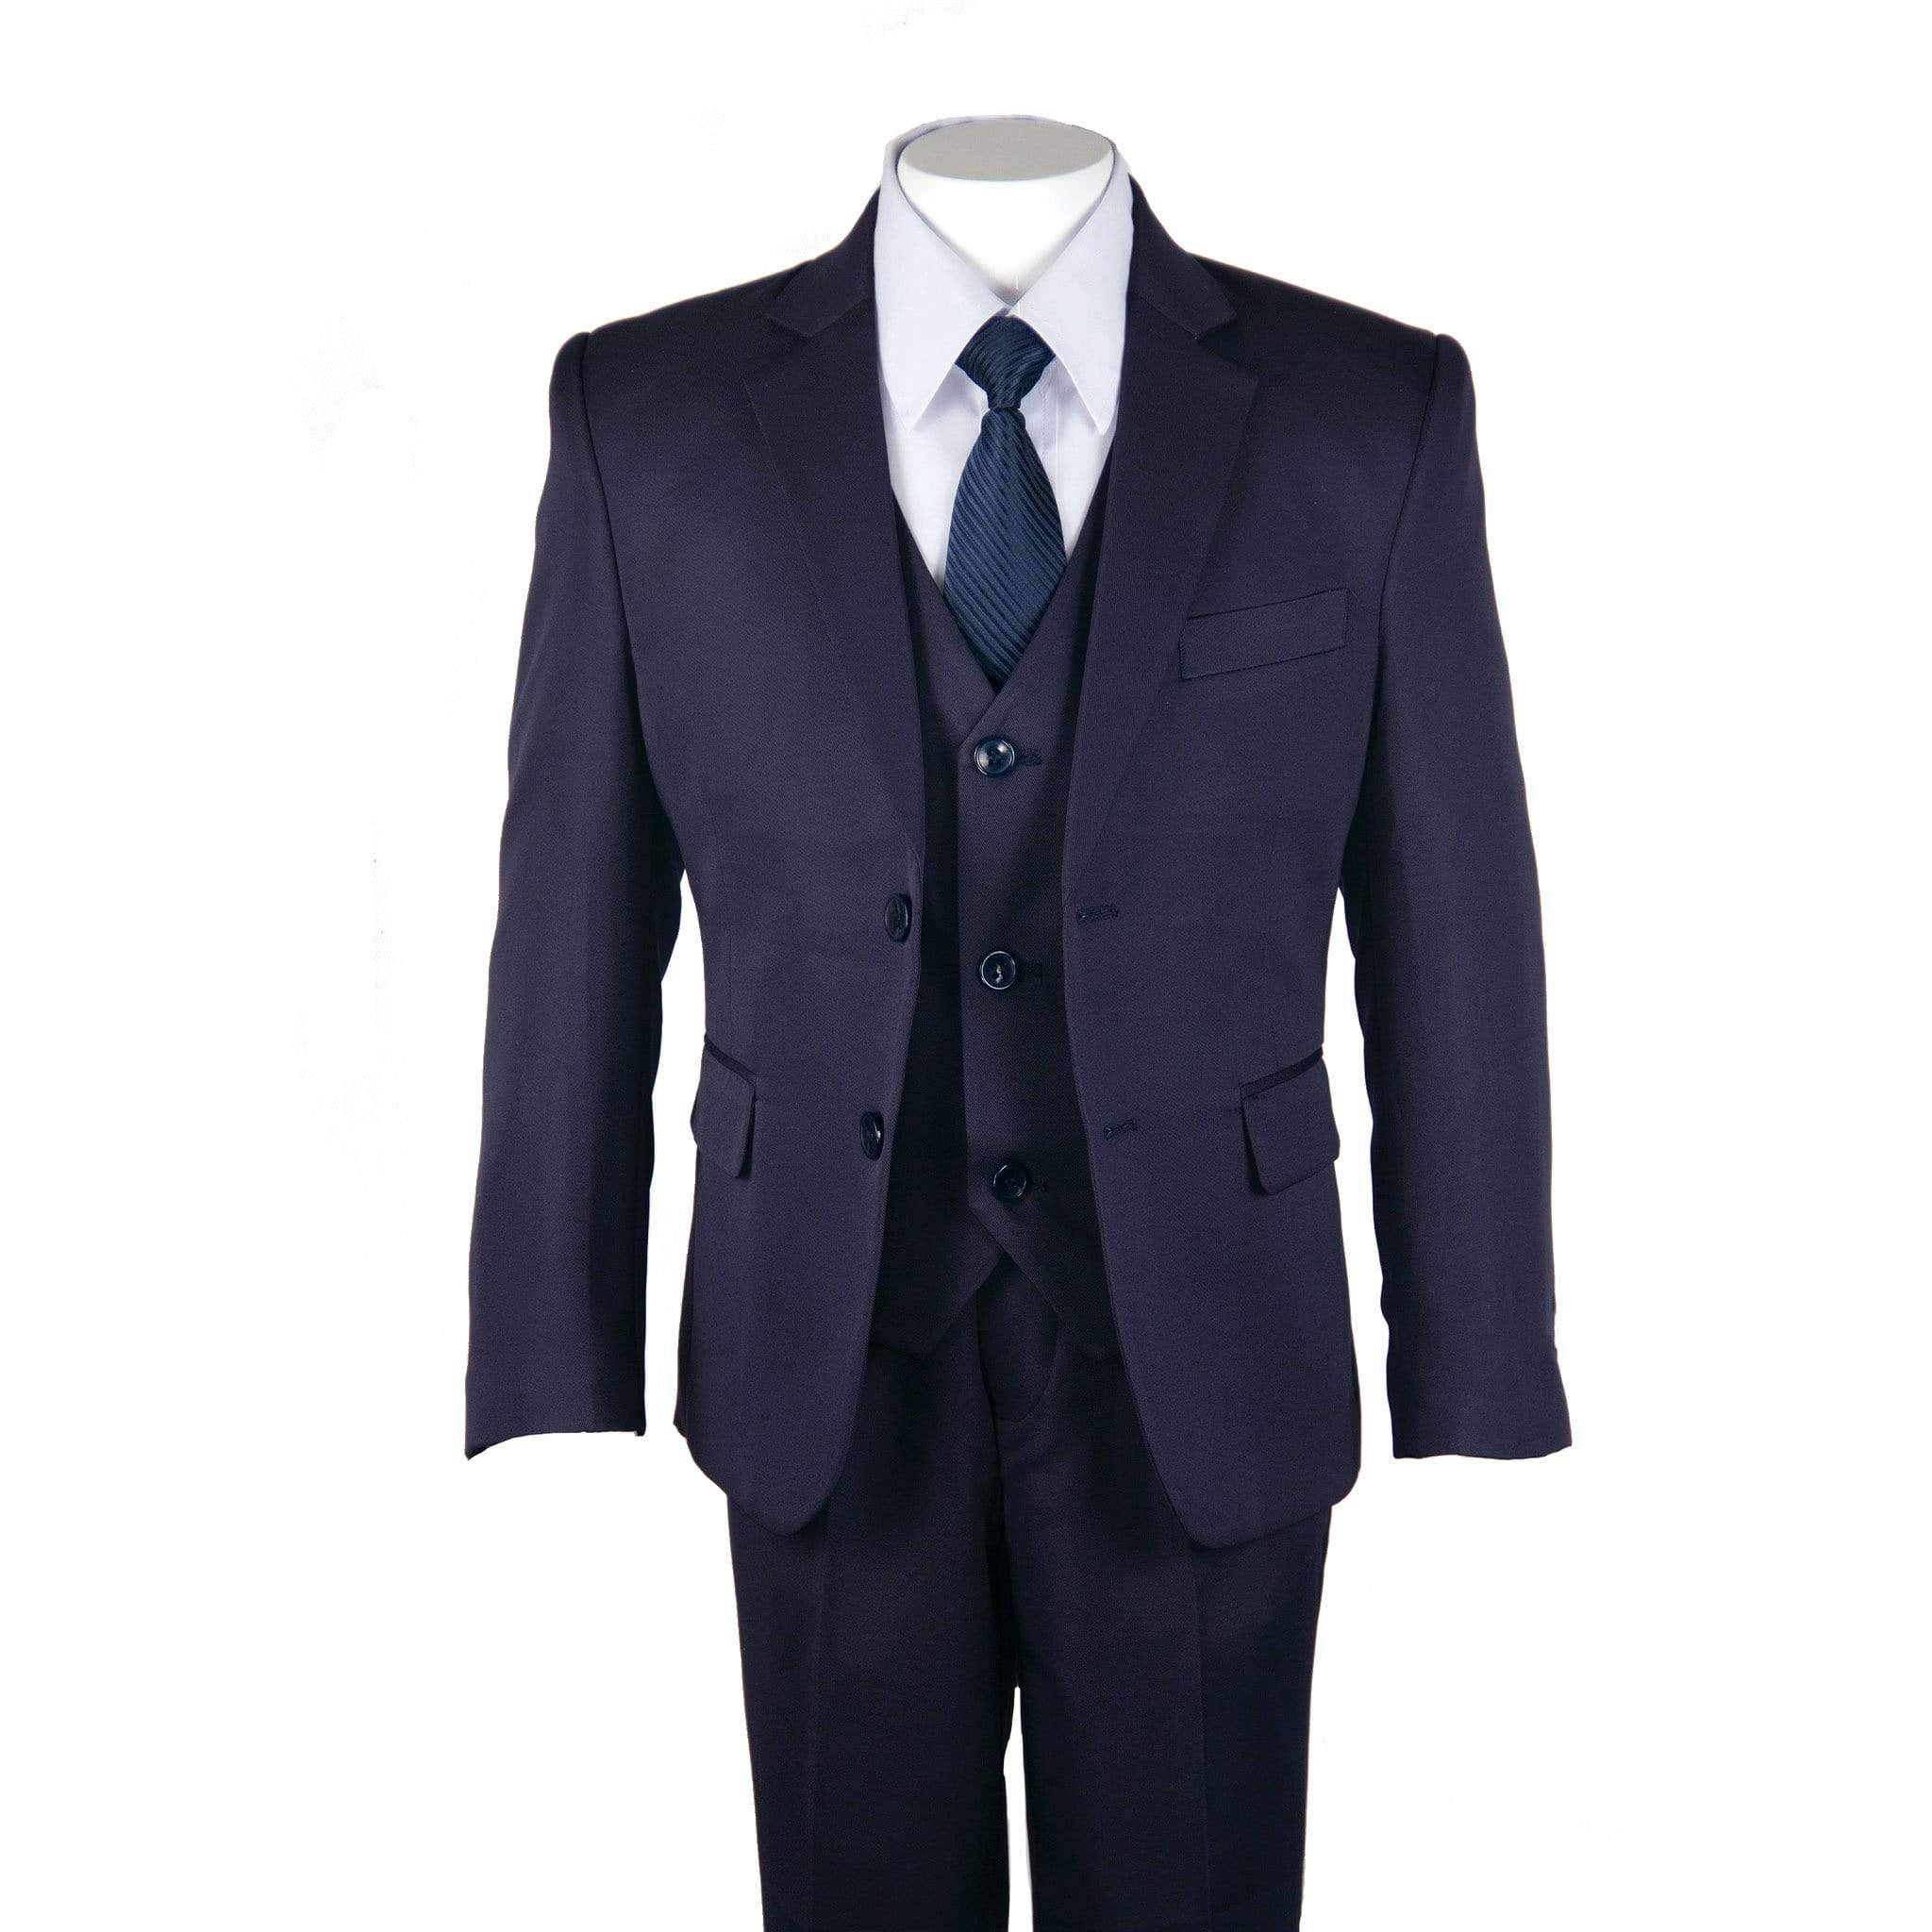 Top more than 147 suit 5 piece